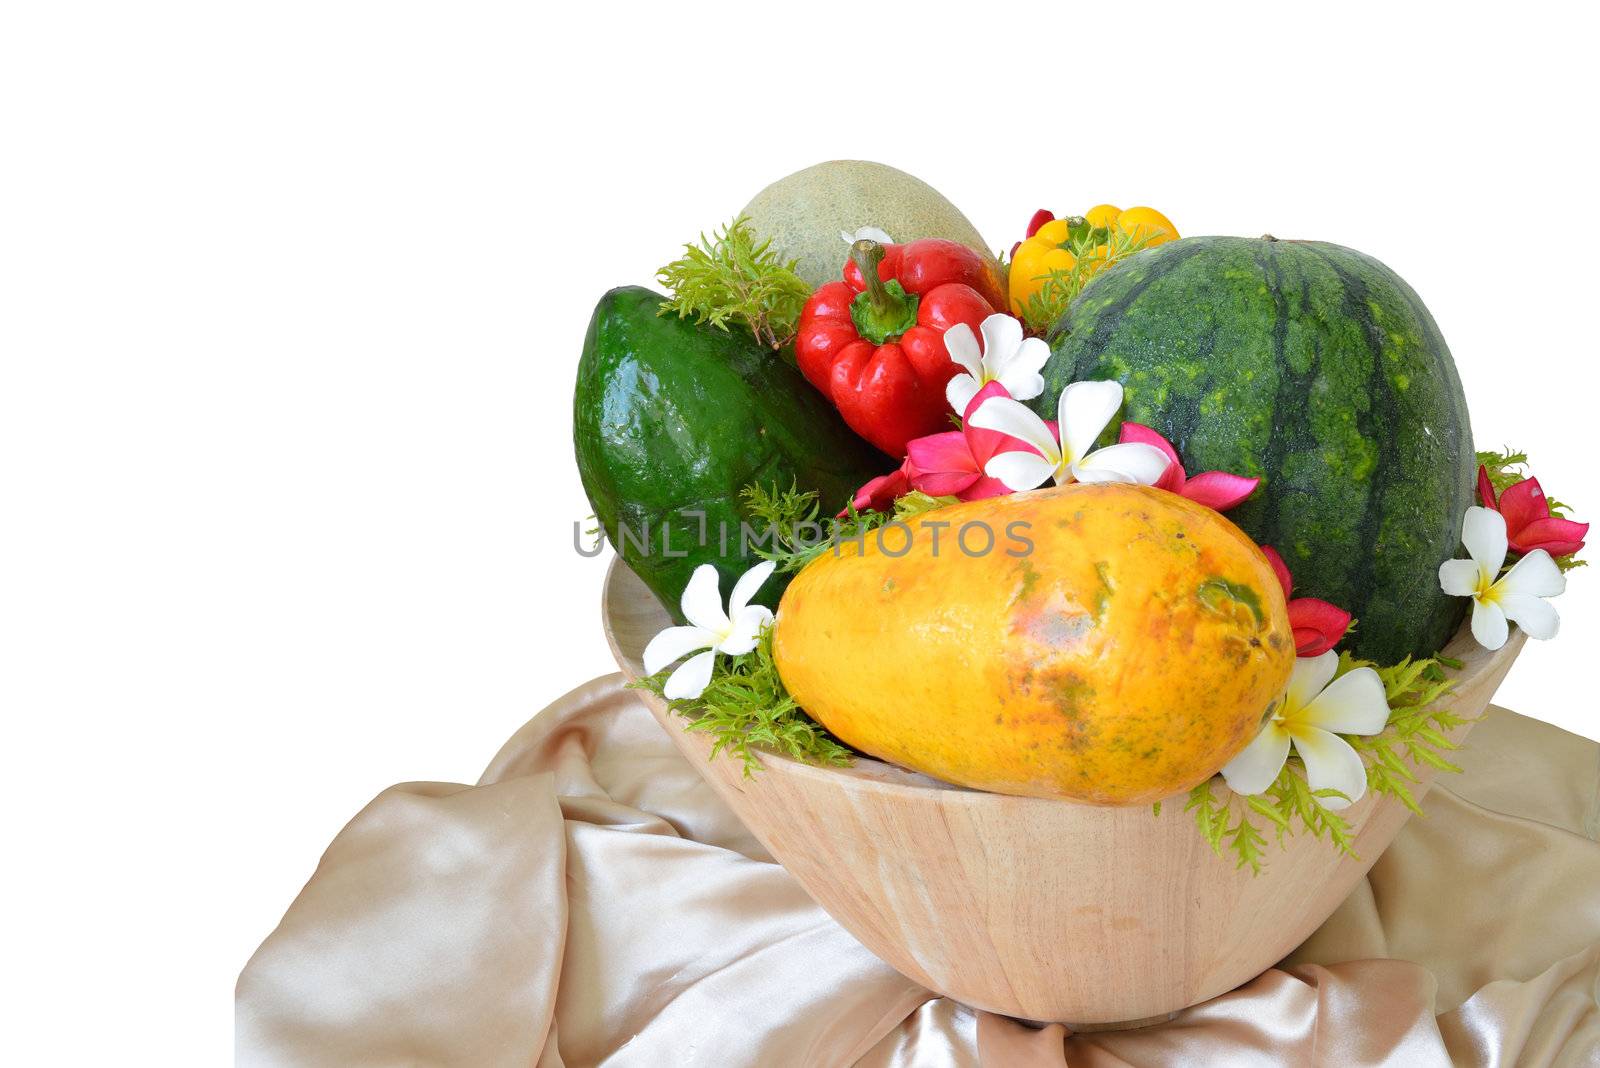 Decoration fruit with flower and vegetable in the wooden bowl and isolated on white background.